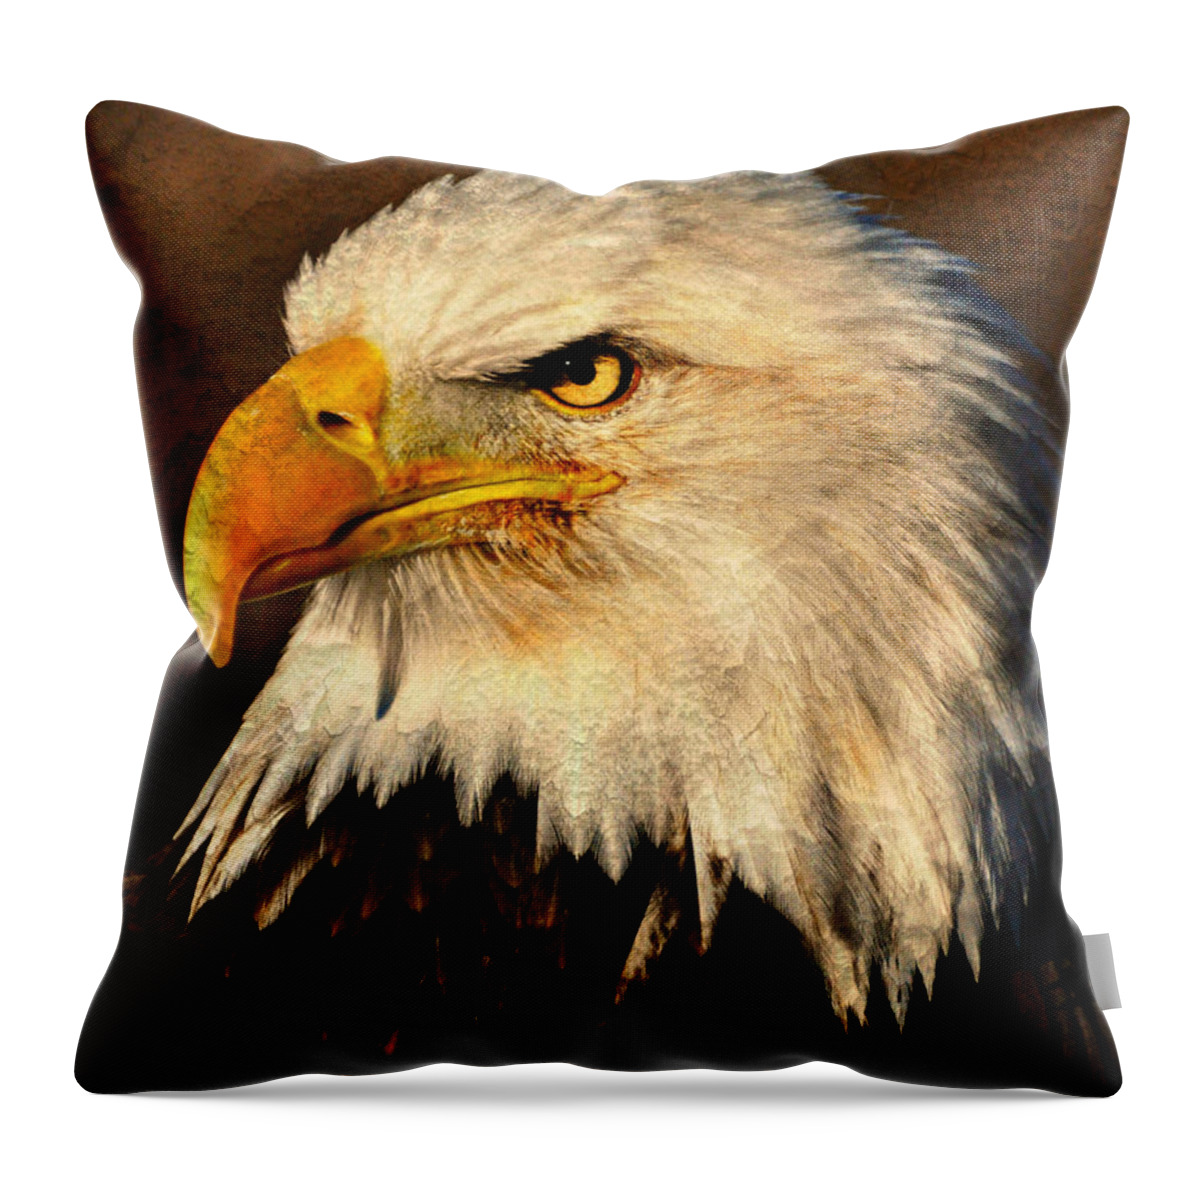 Eagle Throw Pillow featuring the photograph Eagle 51 by Marty Koch